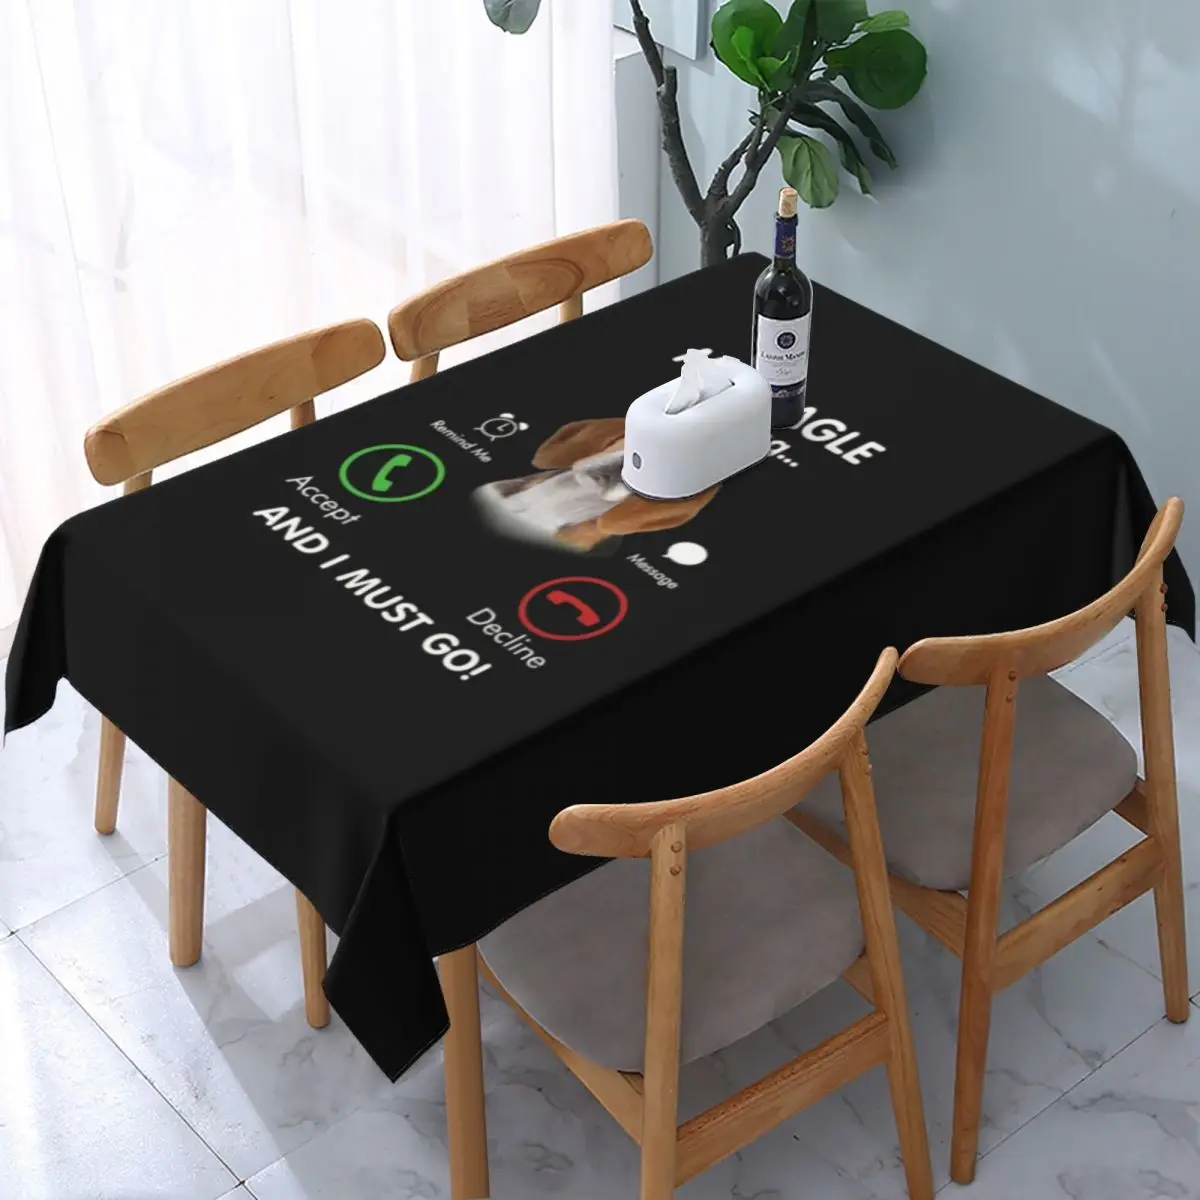 

Rectangular Beagle Dog Table Cloth Oilproof Tablecloth 45"-50" Table Cover Backed with Elastic Edge